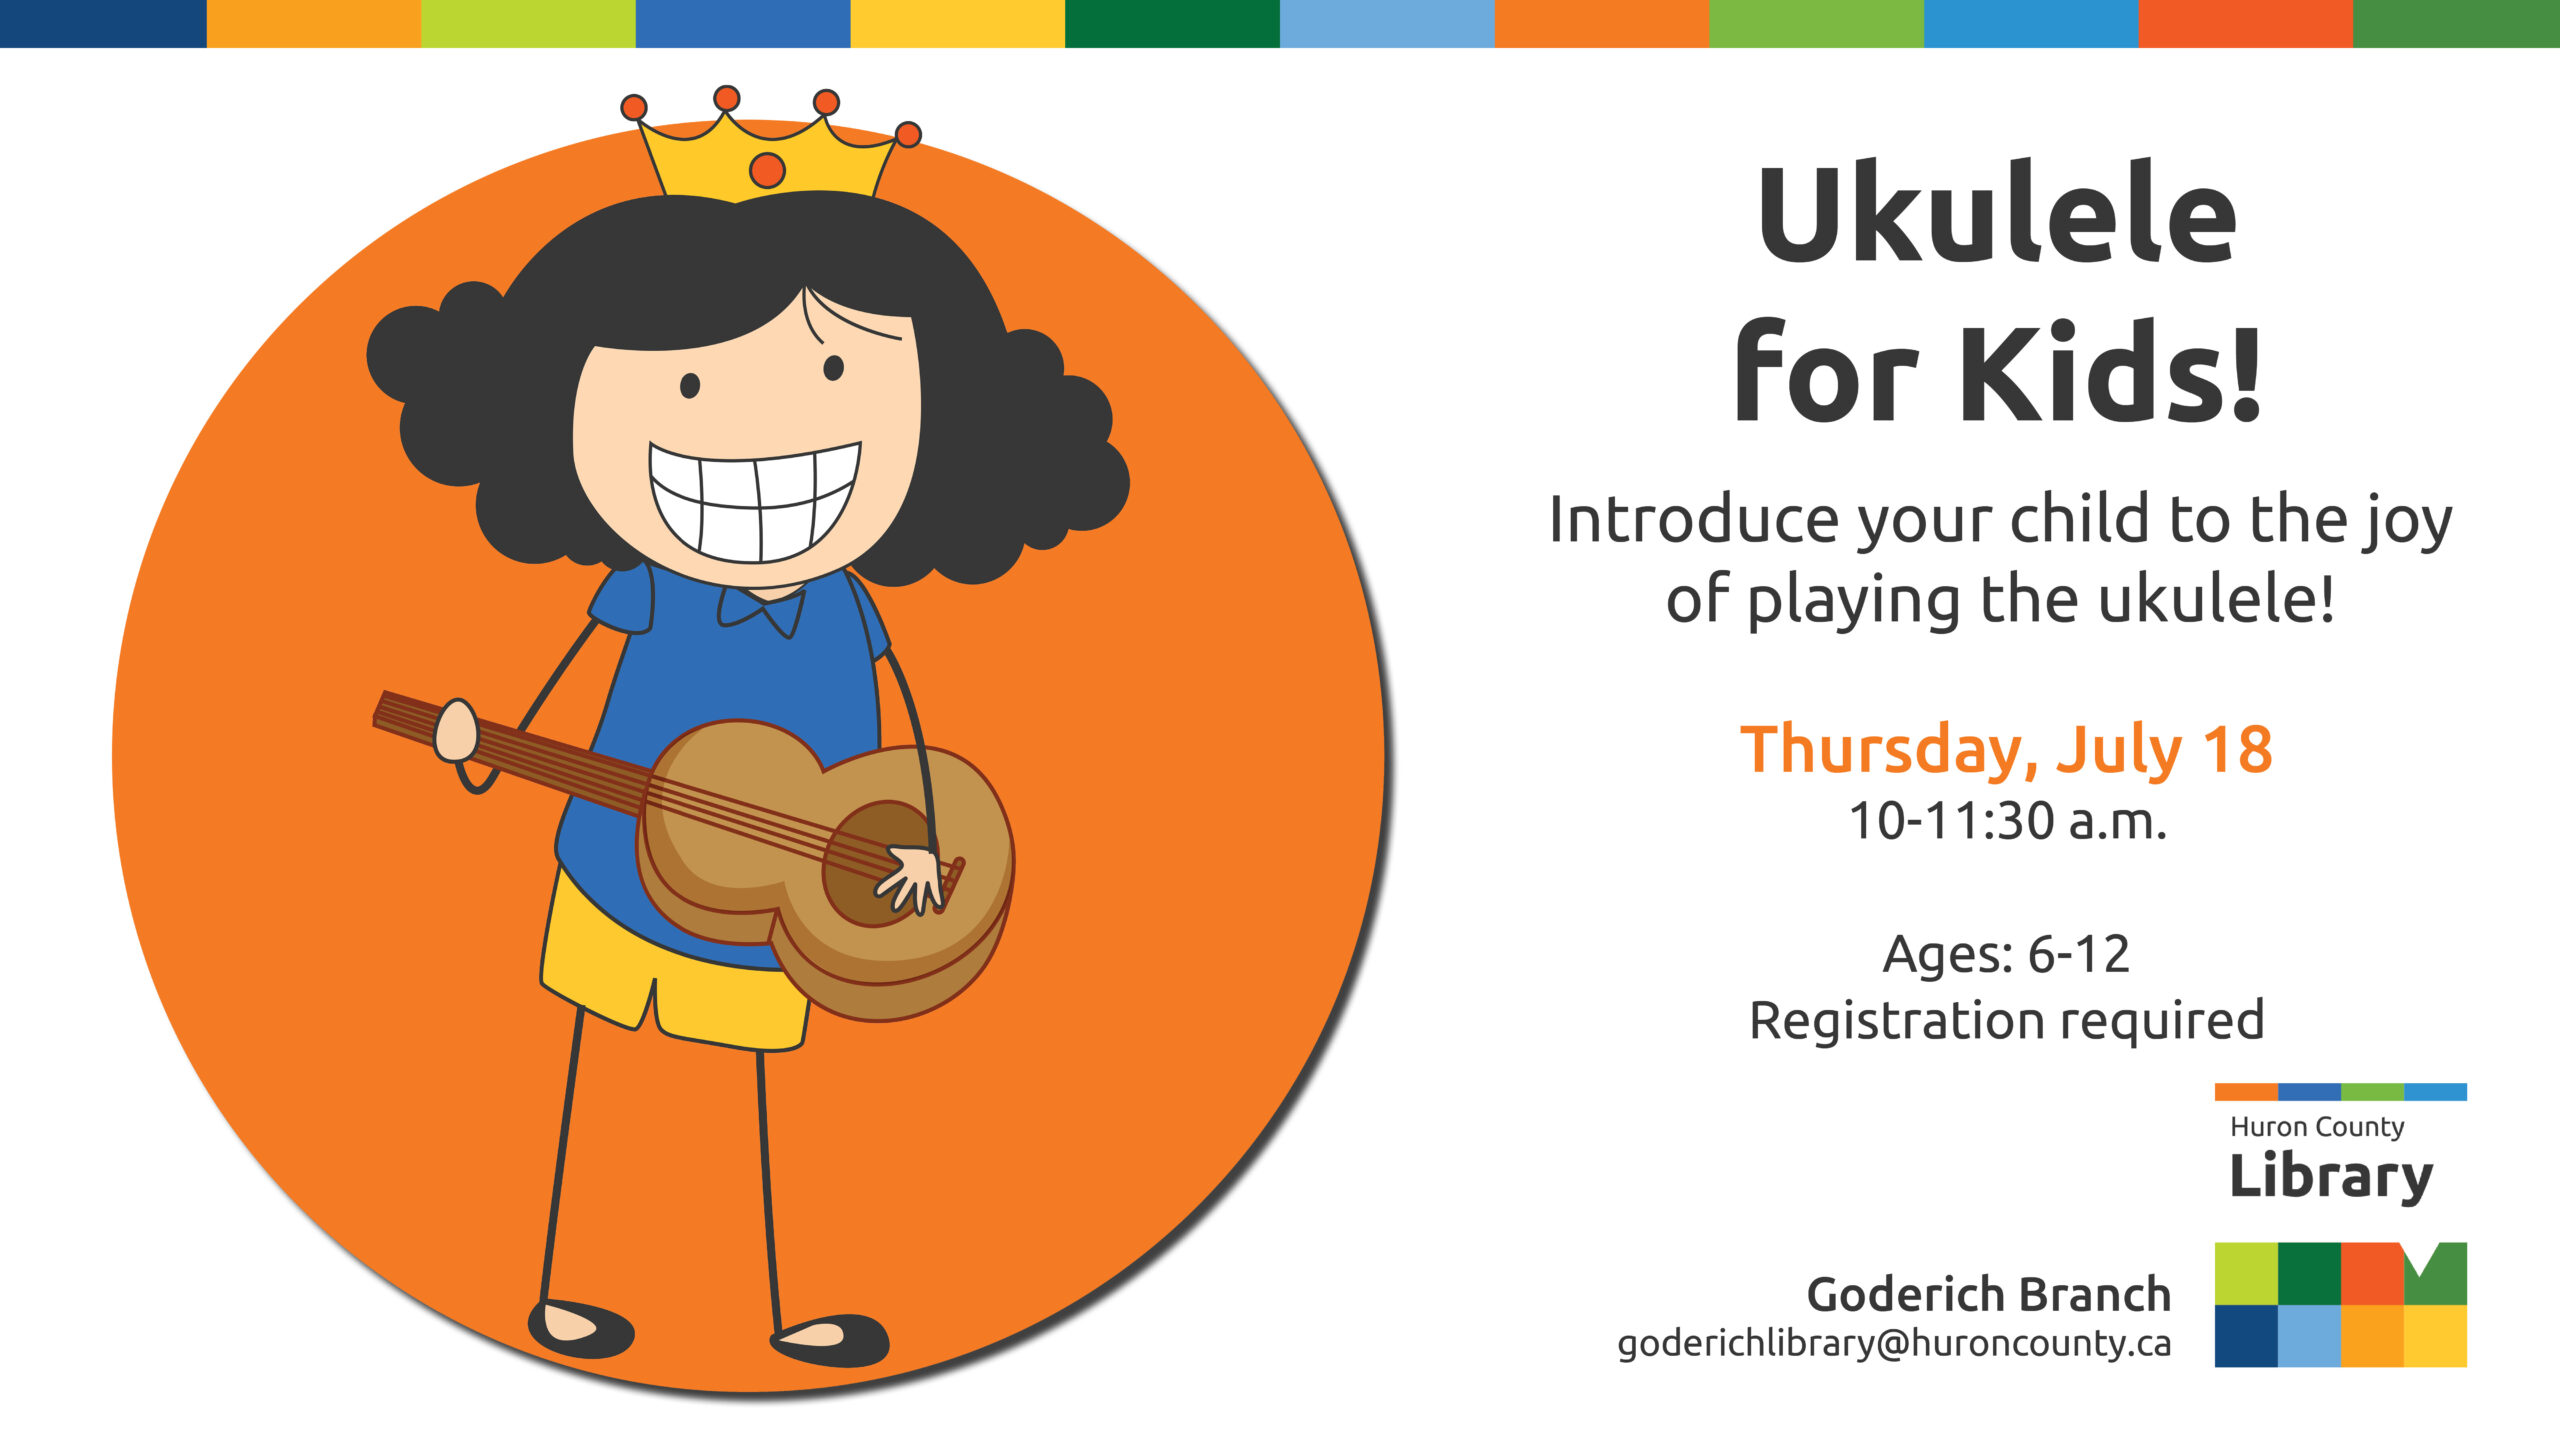 Illustration of a girl playing a ukulele with text promoting ukulele for kids at Goderich